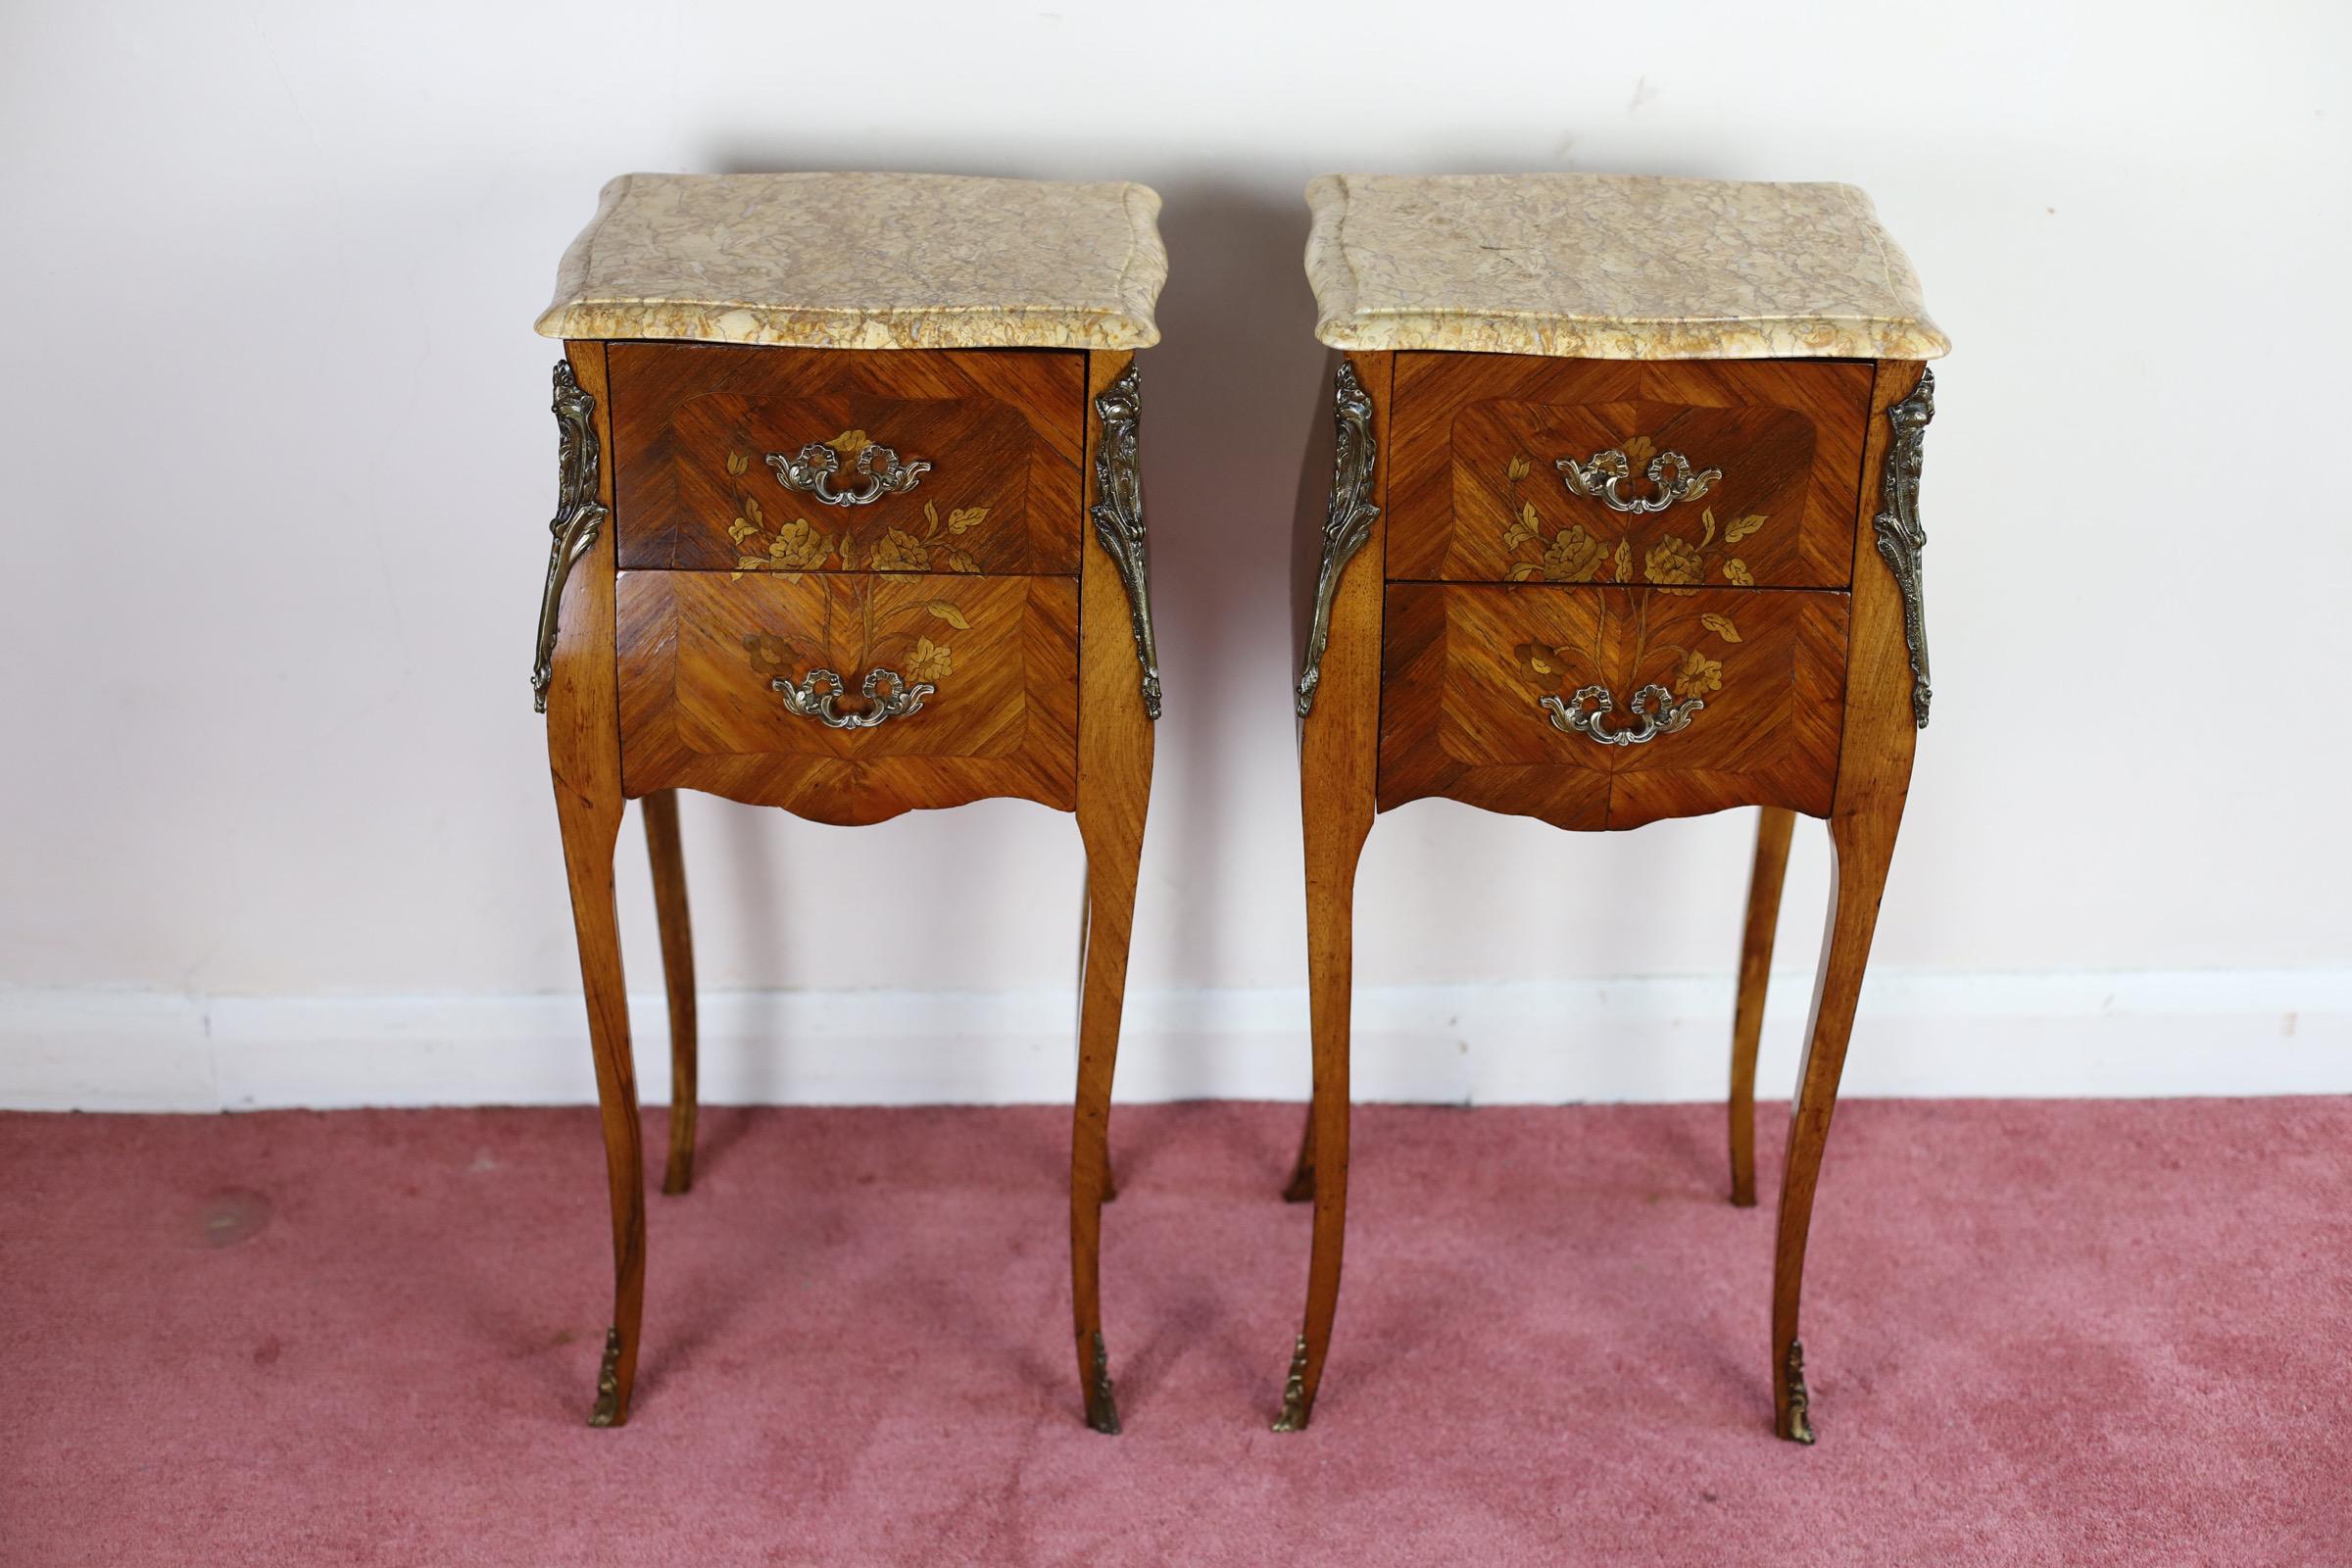 Antique Louis XV French Marquetry Marble Nightstands.
Beautiful pair of tulipwood night antique tables, having serpentine marble tops above 2 flower inlaid drawers fitted with original brass handles and flanked by ormolu decoration, all standing on